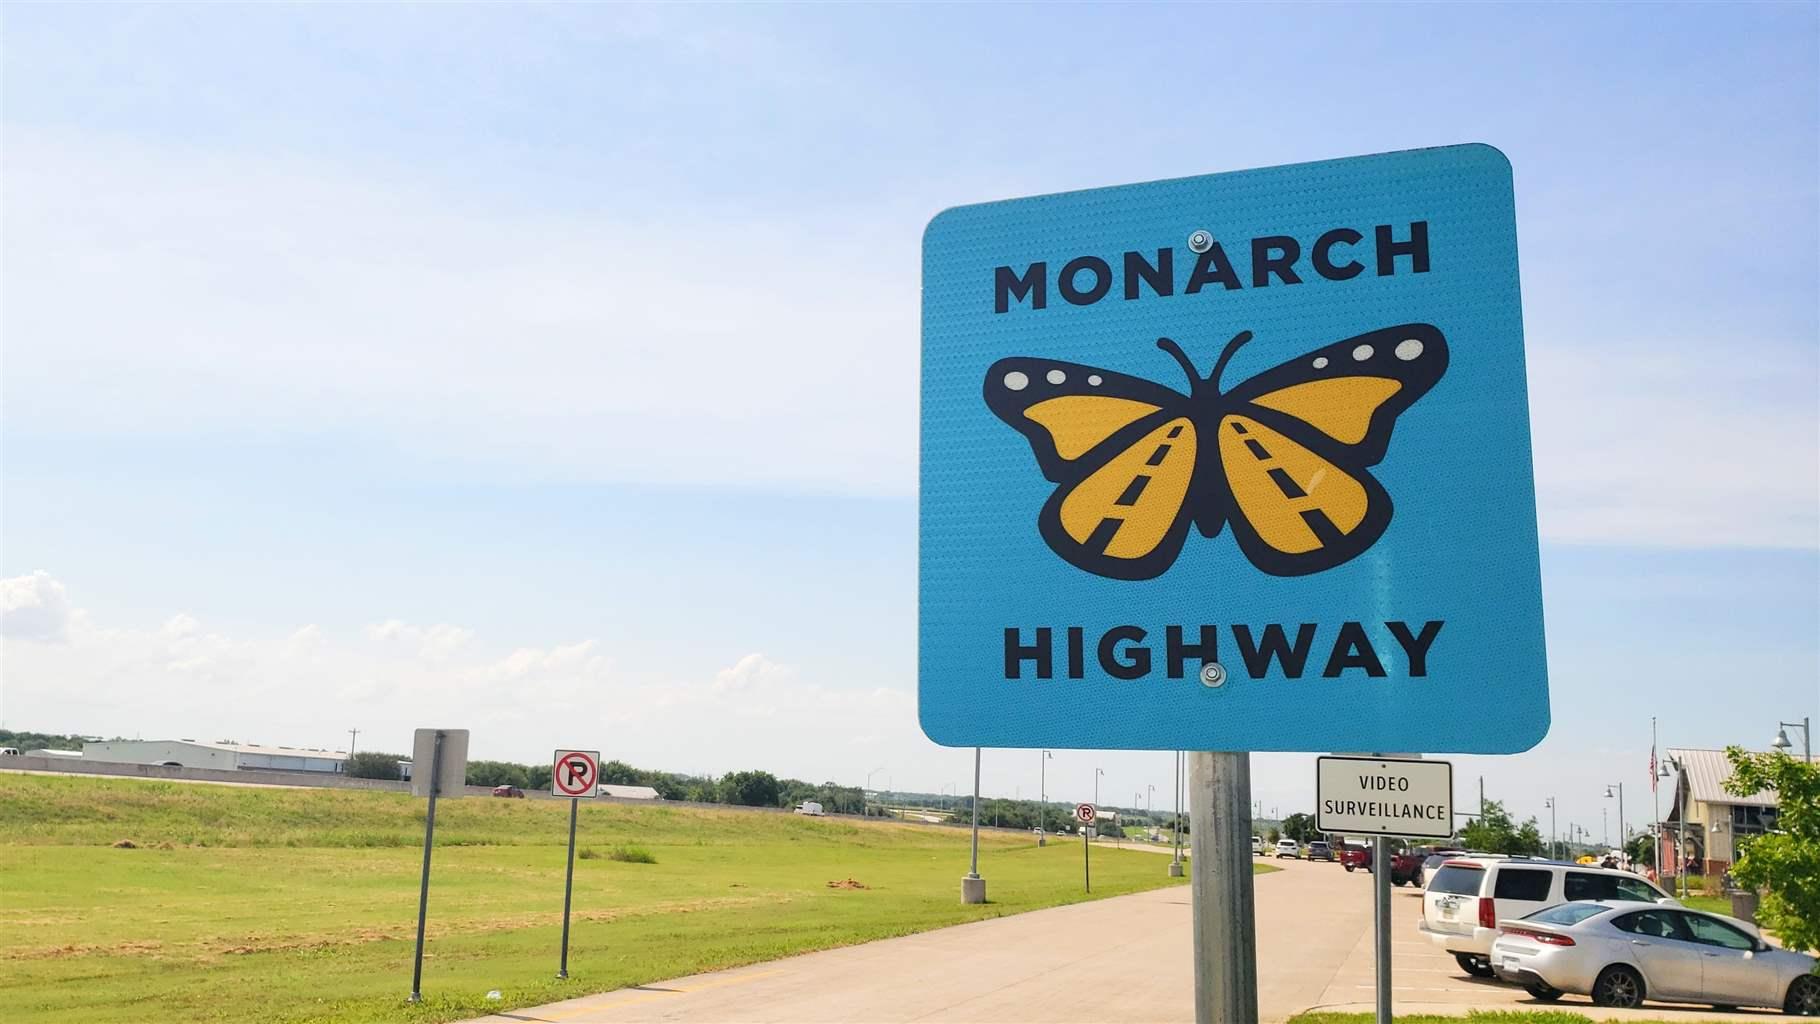 A road sign marks the Monarch Highway corridor near Abbott, Texas. Energy and transportation companies as well as some state and local governments across 23 states have voluntarily agreed to increase monarch habitat conservation.